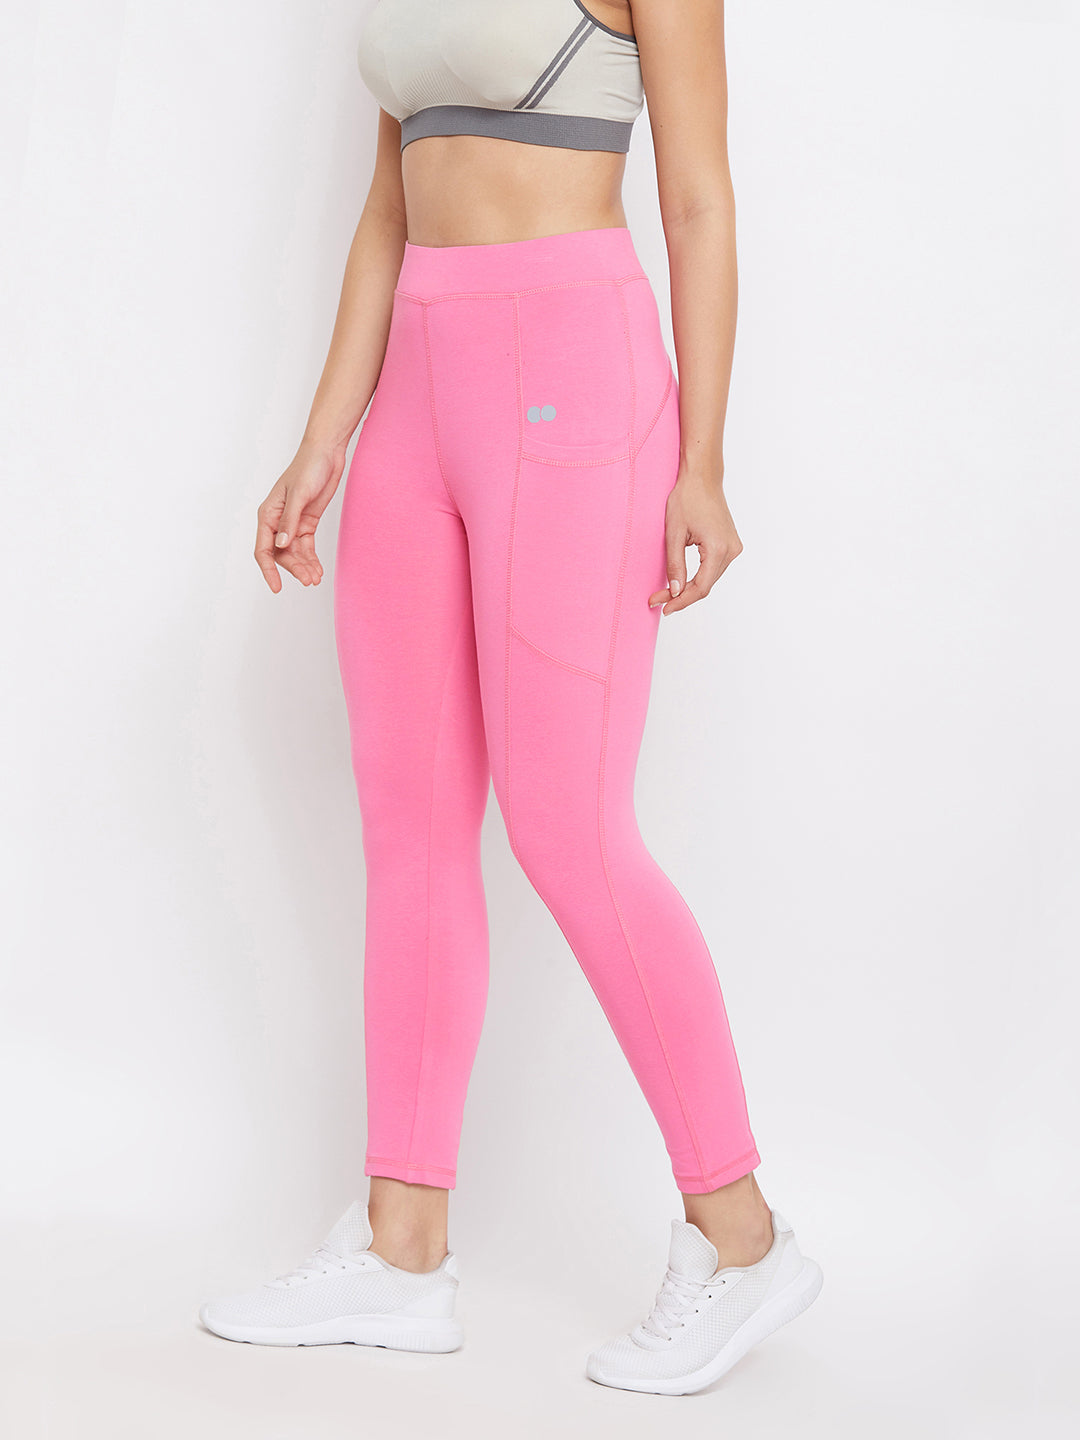 Baby Pink Snug Fit Active Ankle-Length Tights